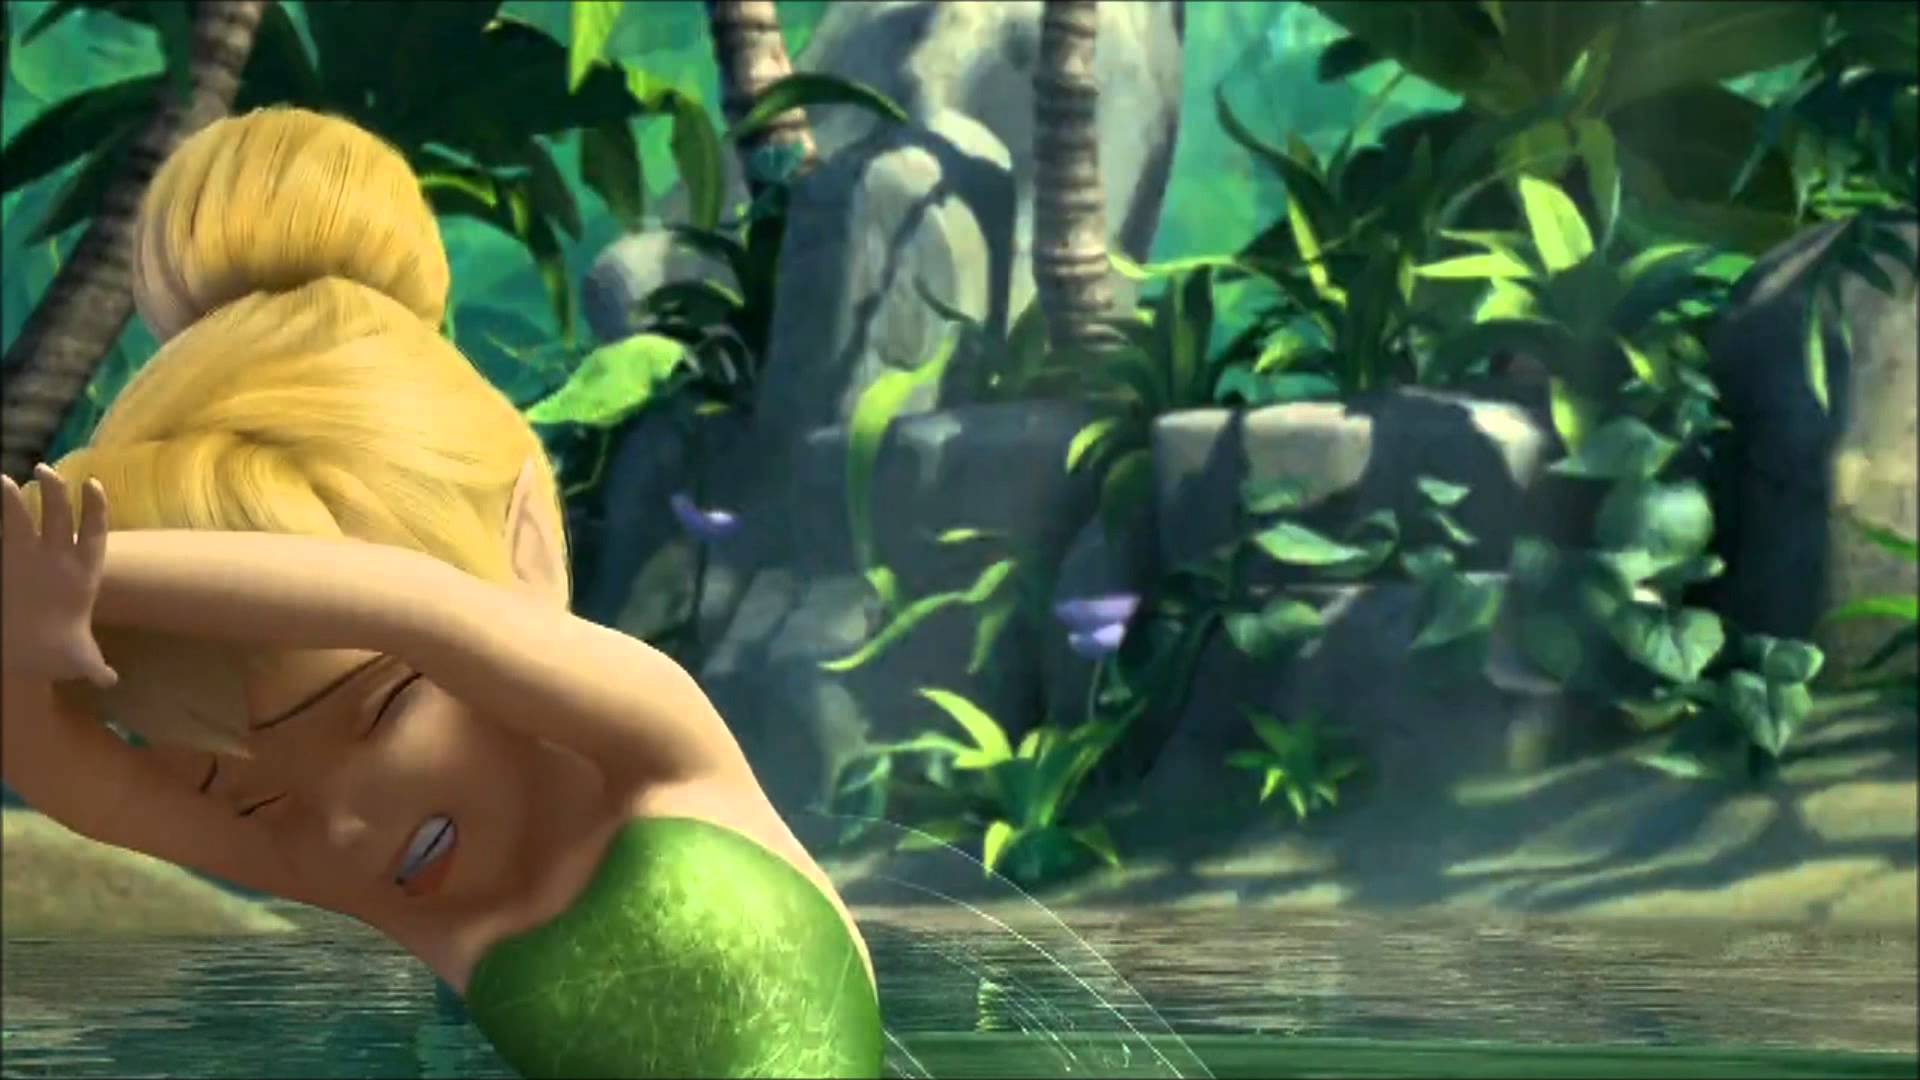 Best scenes from Tinker Bell  - Tinkerbell Clips